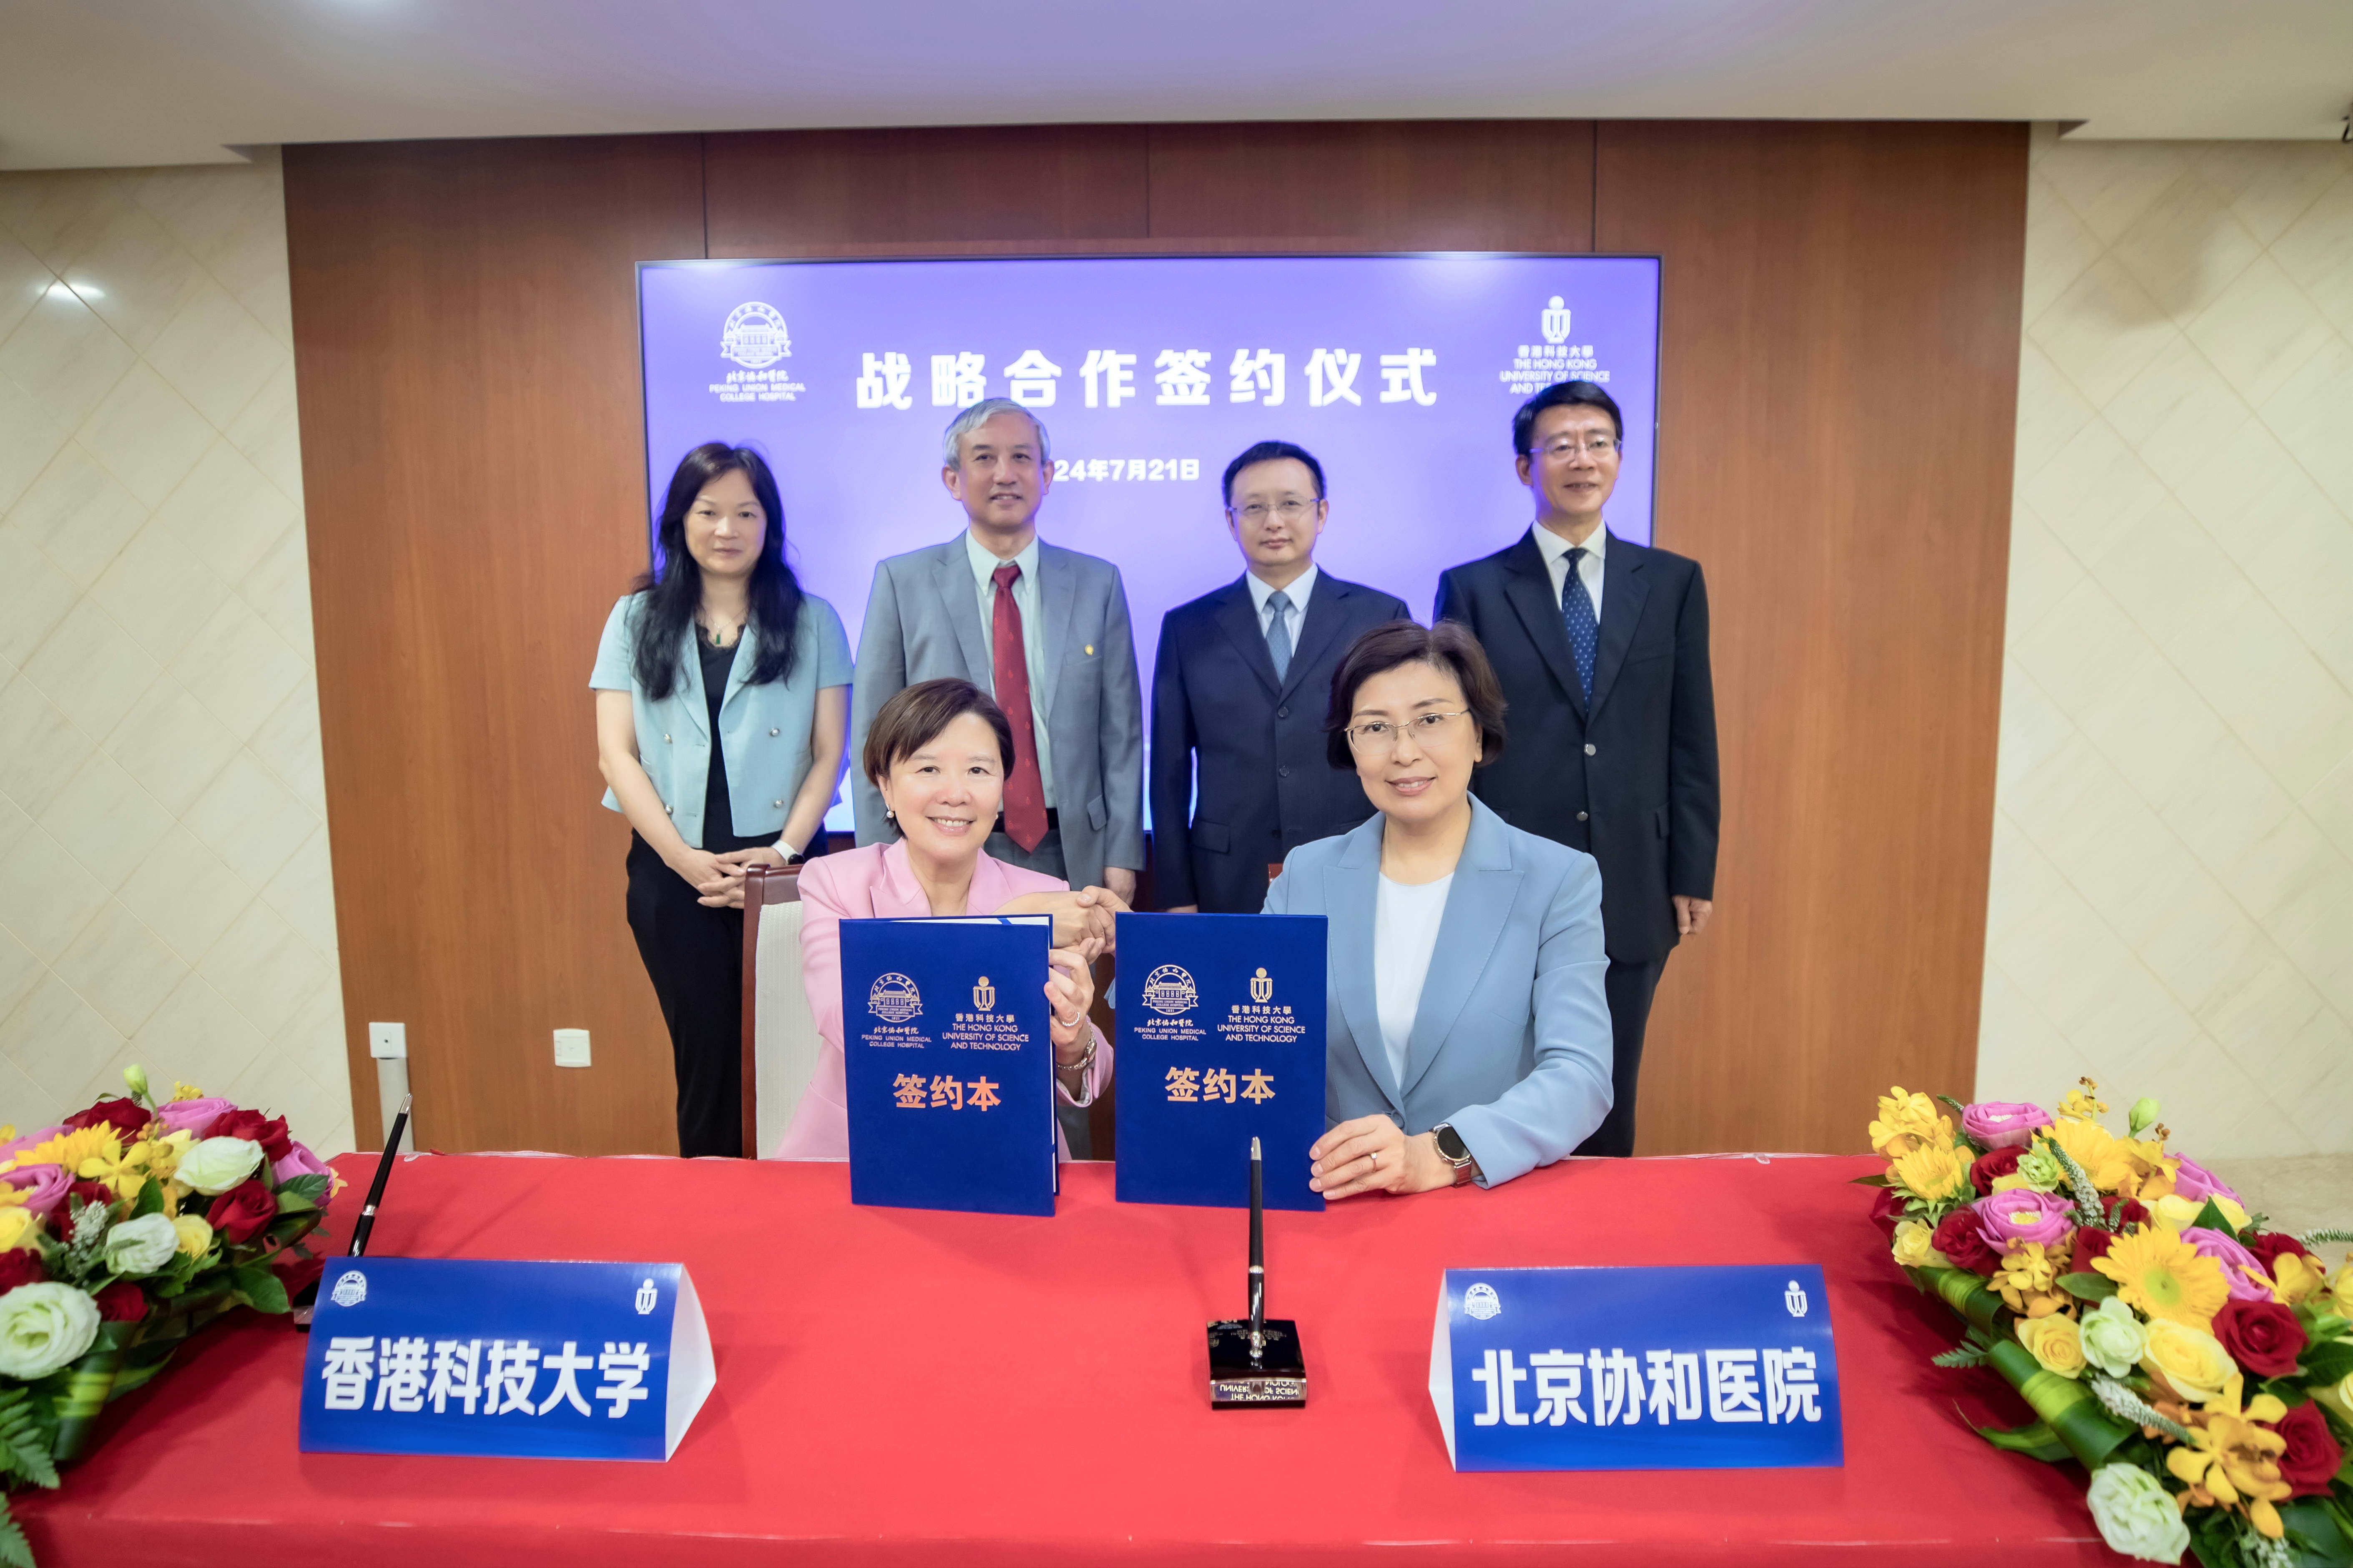 HKUST President Prof. Nancy IP (front left) and PUMCH President Prof. ZHANG Shuyang (front right) sign the agreement under the witnesses of HKUST Associate Provost (Mainland Affairs) Prof. TONG Penger (back row, second left), Acting Head of Division of Integrative Systems and Design Prof. ZHANG Qian (back row, first left), PUMCH Secretary of the Party Committee Prof. WU Peixin (back row, second right), and PUMCH Vice President Prof. HAN Ding (back row, first right).